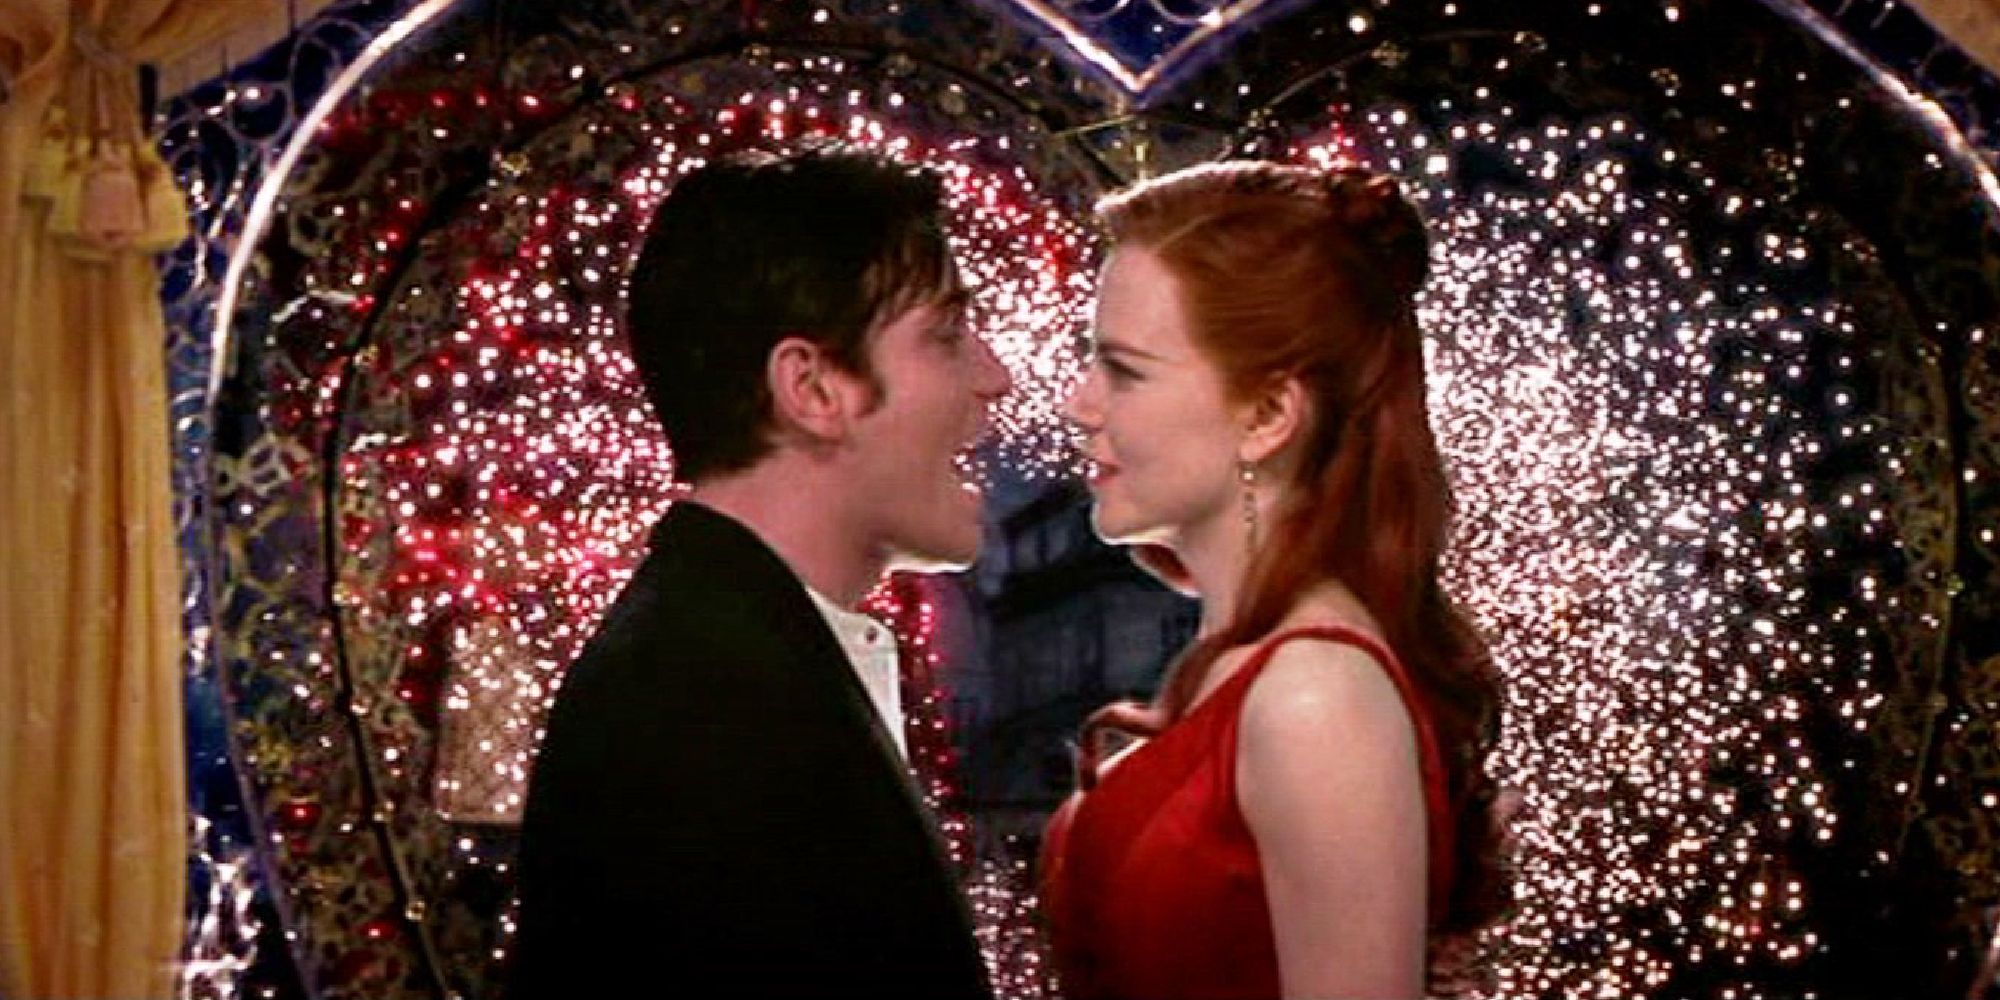 Christian and Satine singing while lights shine in the backround in Moulin Rouge!